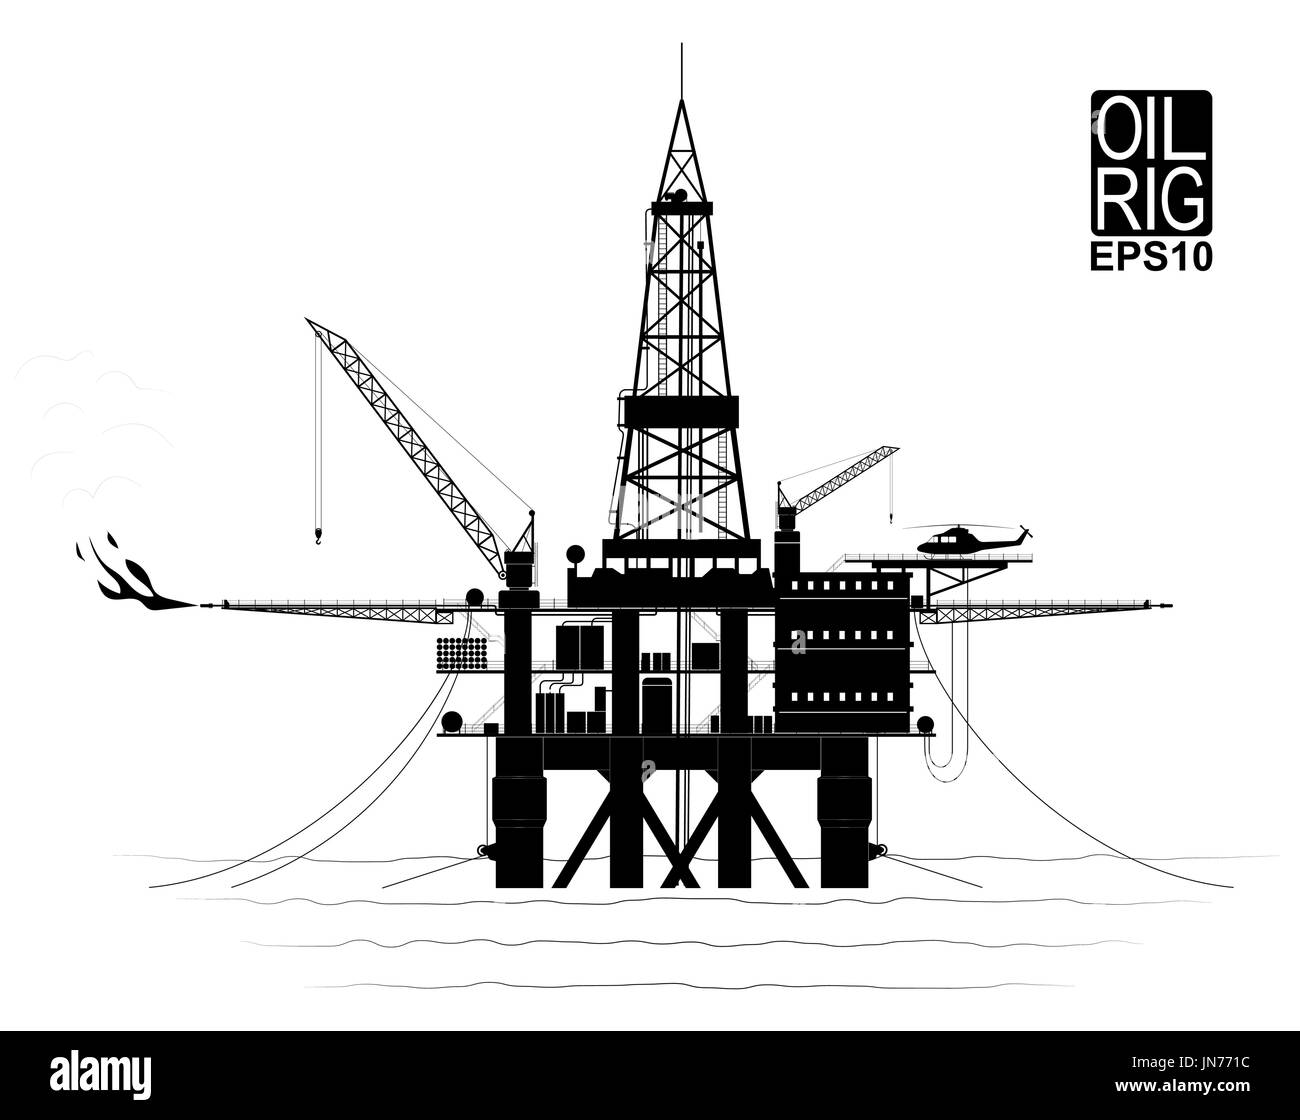 Drilling platform for oil or gas production from the ocean floor. Black and white contour with traced details. Side view. Stock Vector